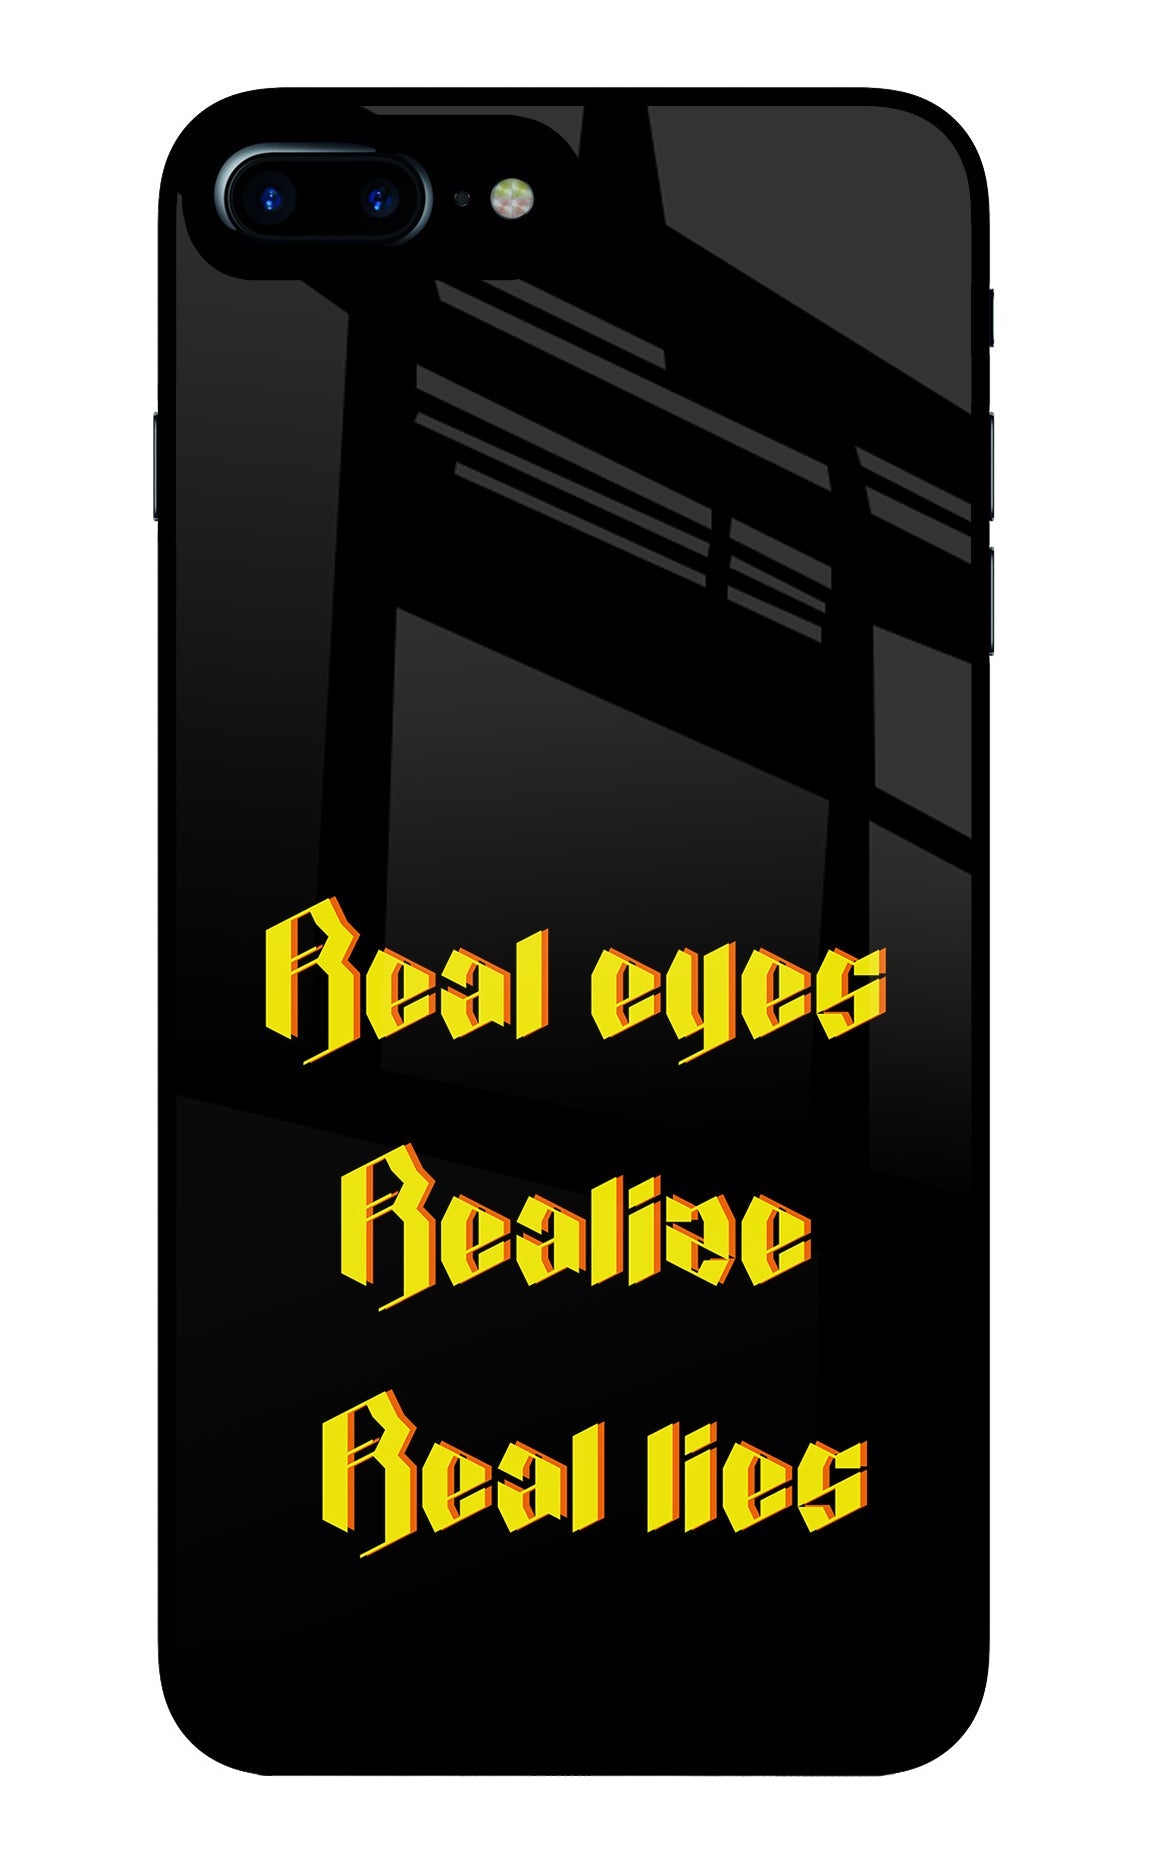 Real Eyes Realize Real Lies iPhone 8 Plus Glass Case